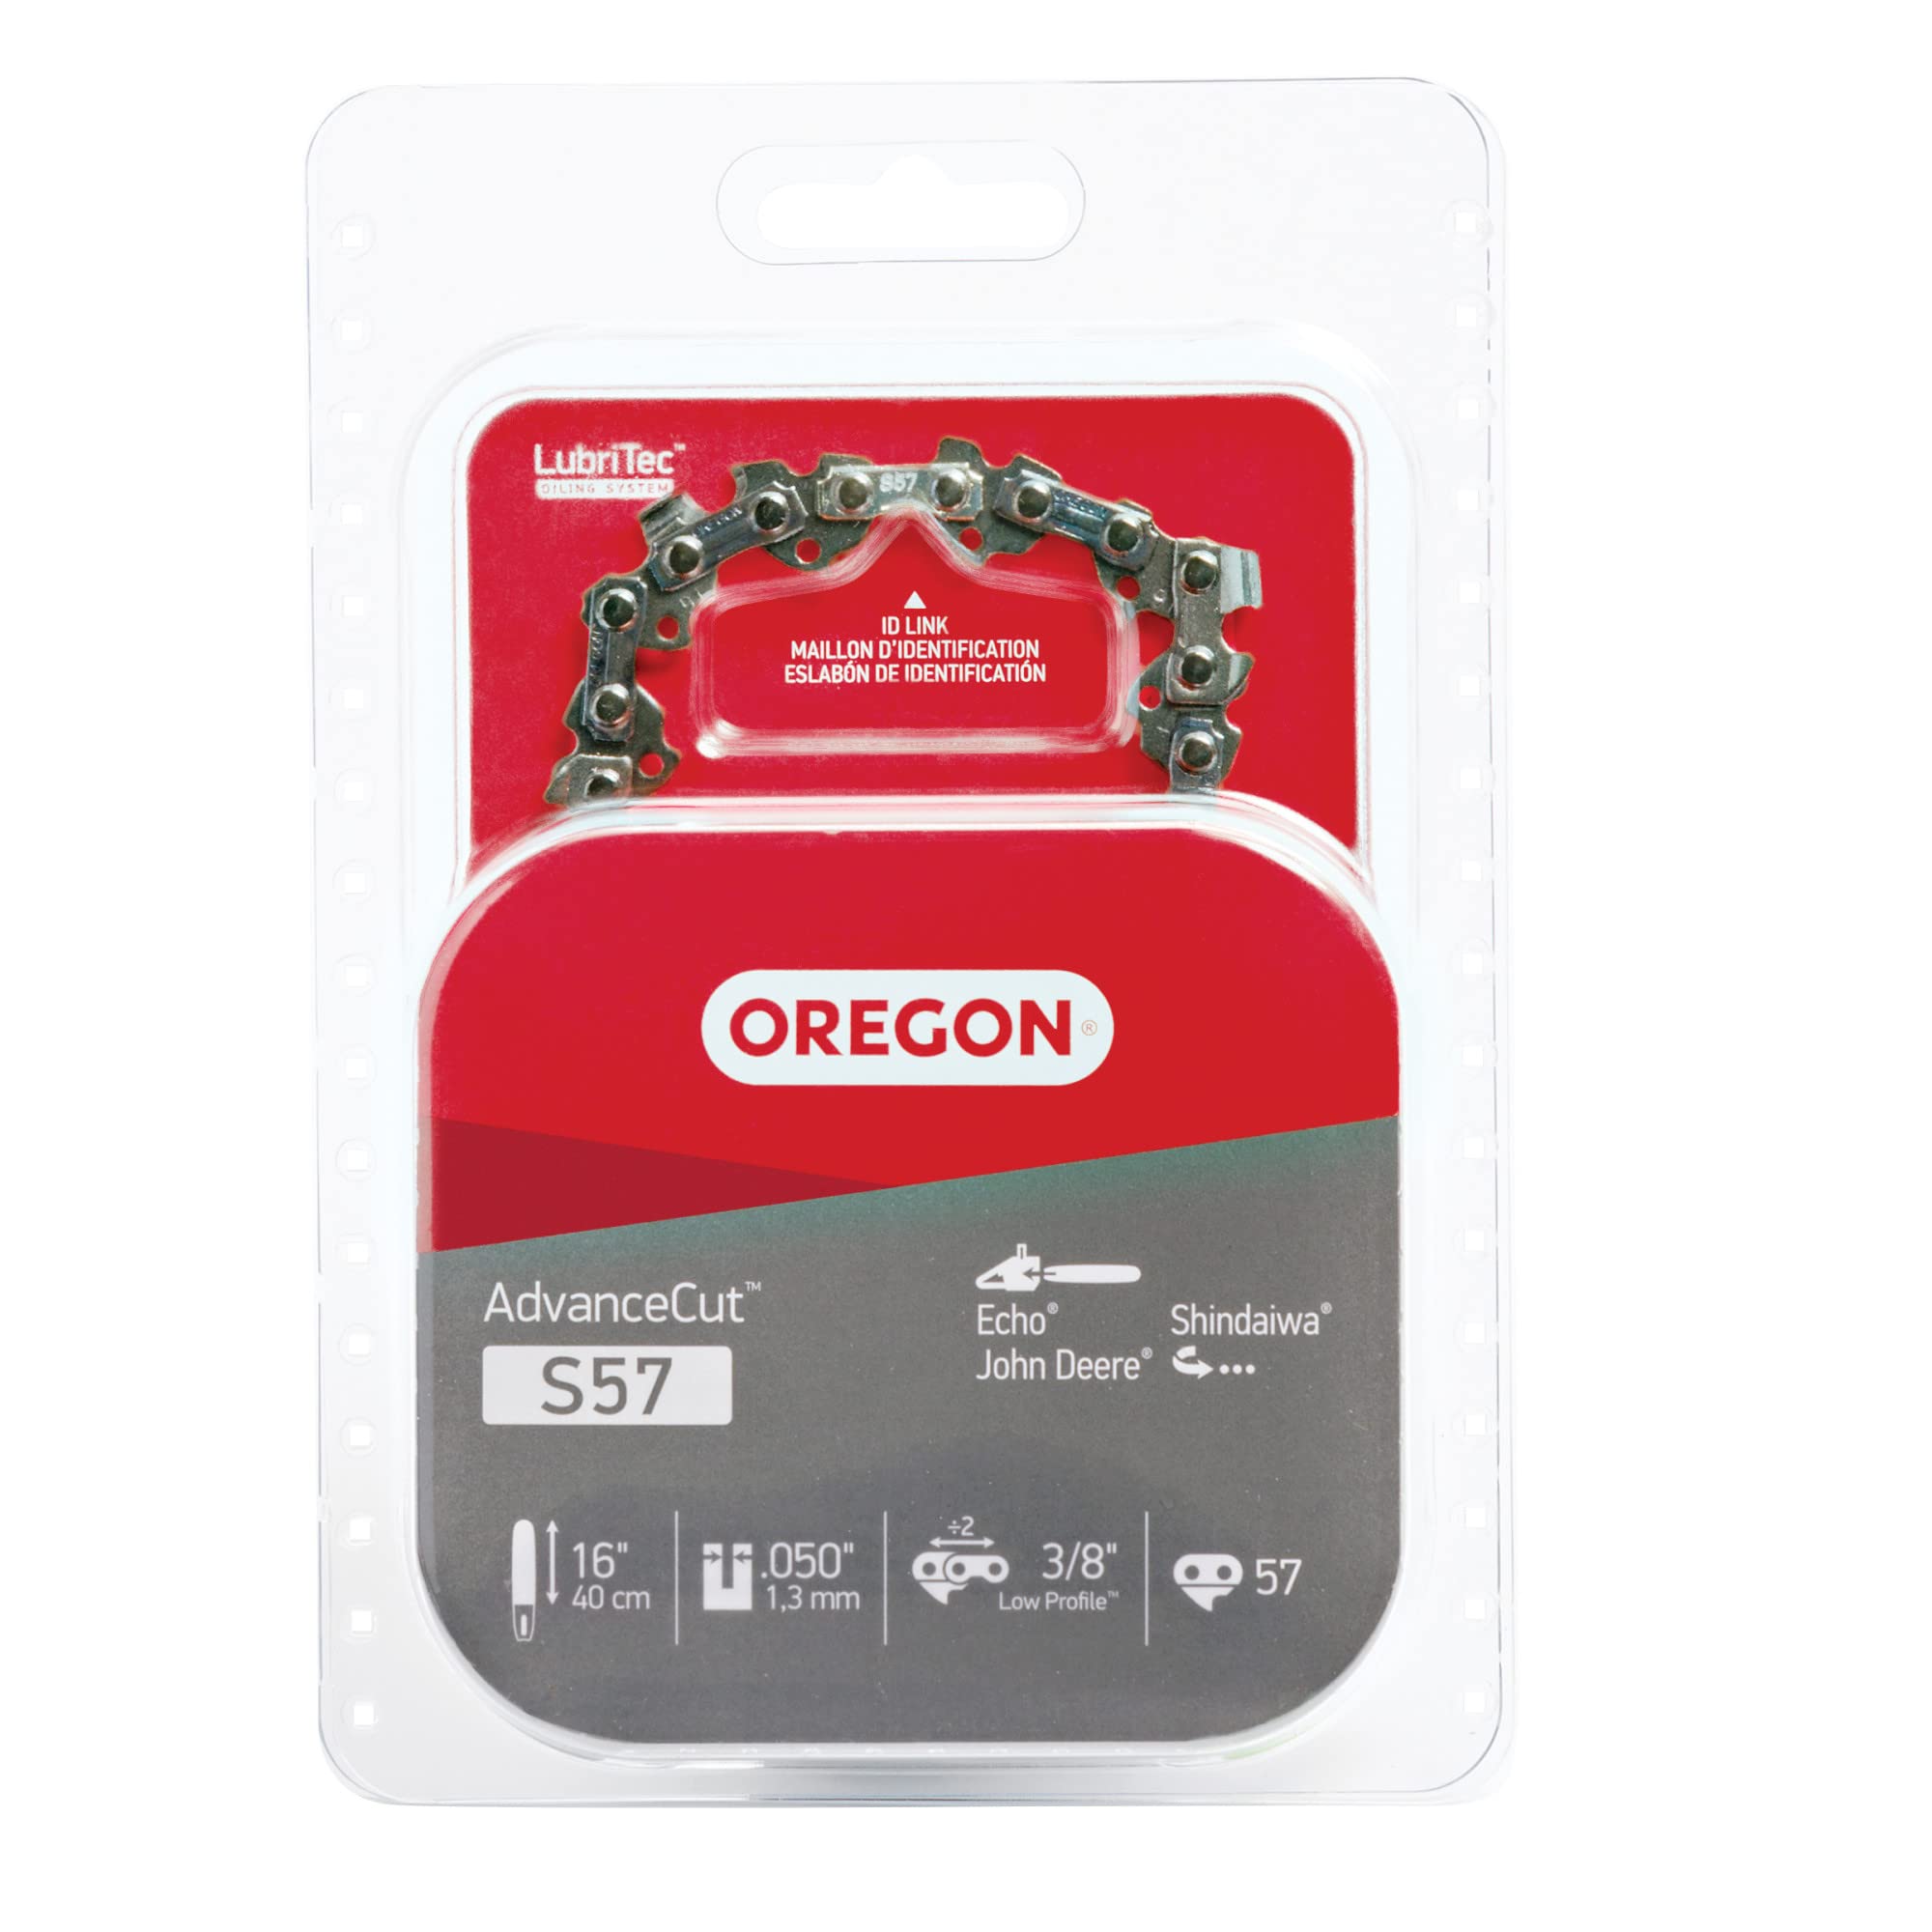 Oregon S57 AdvanceCut Replacement Chainsaw Chain for 16-Inch Guide Bar, 57 Drive Links, Pitch: 3/8" Low Profile, Low Vibration, .050" Gauge,Gray